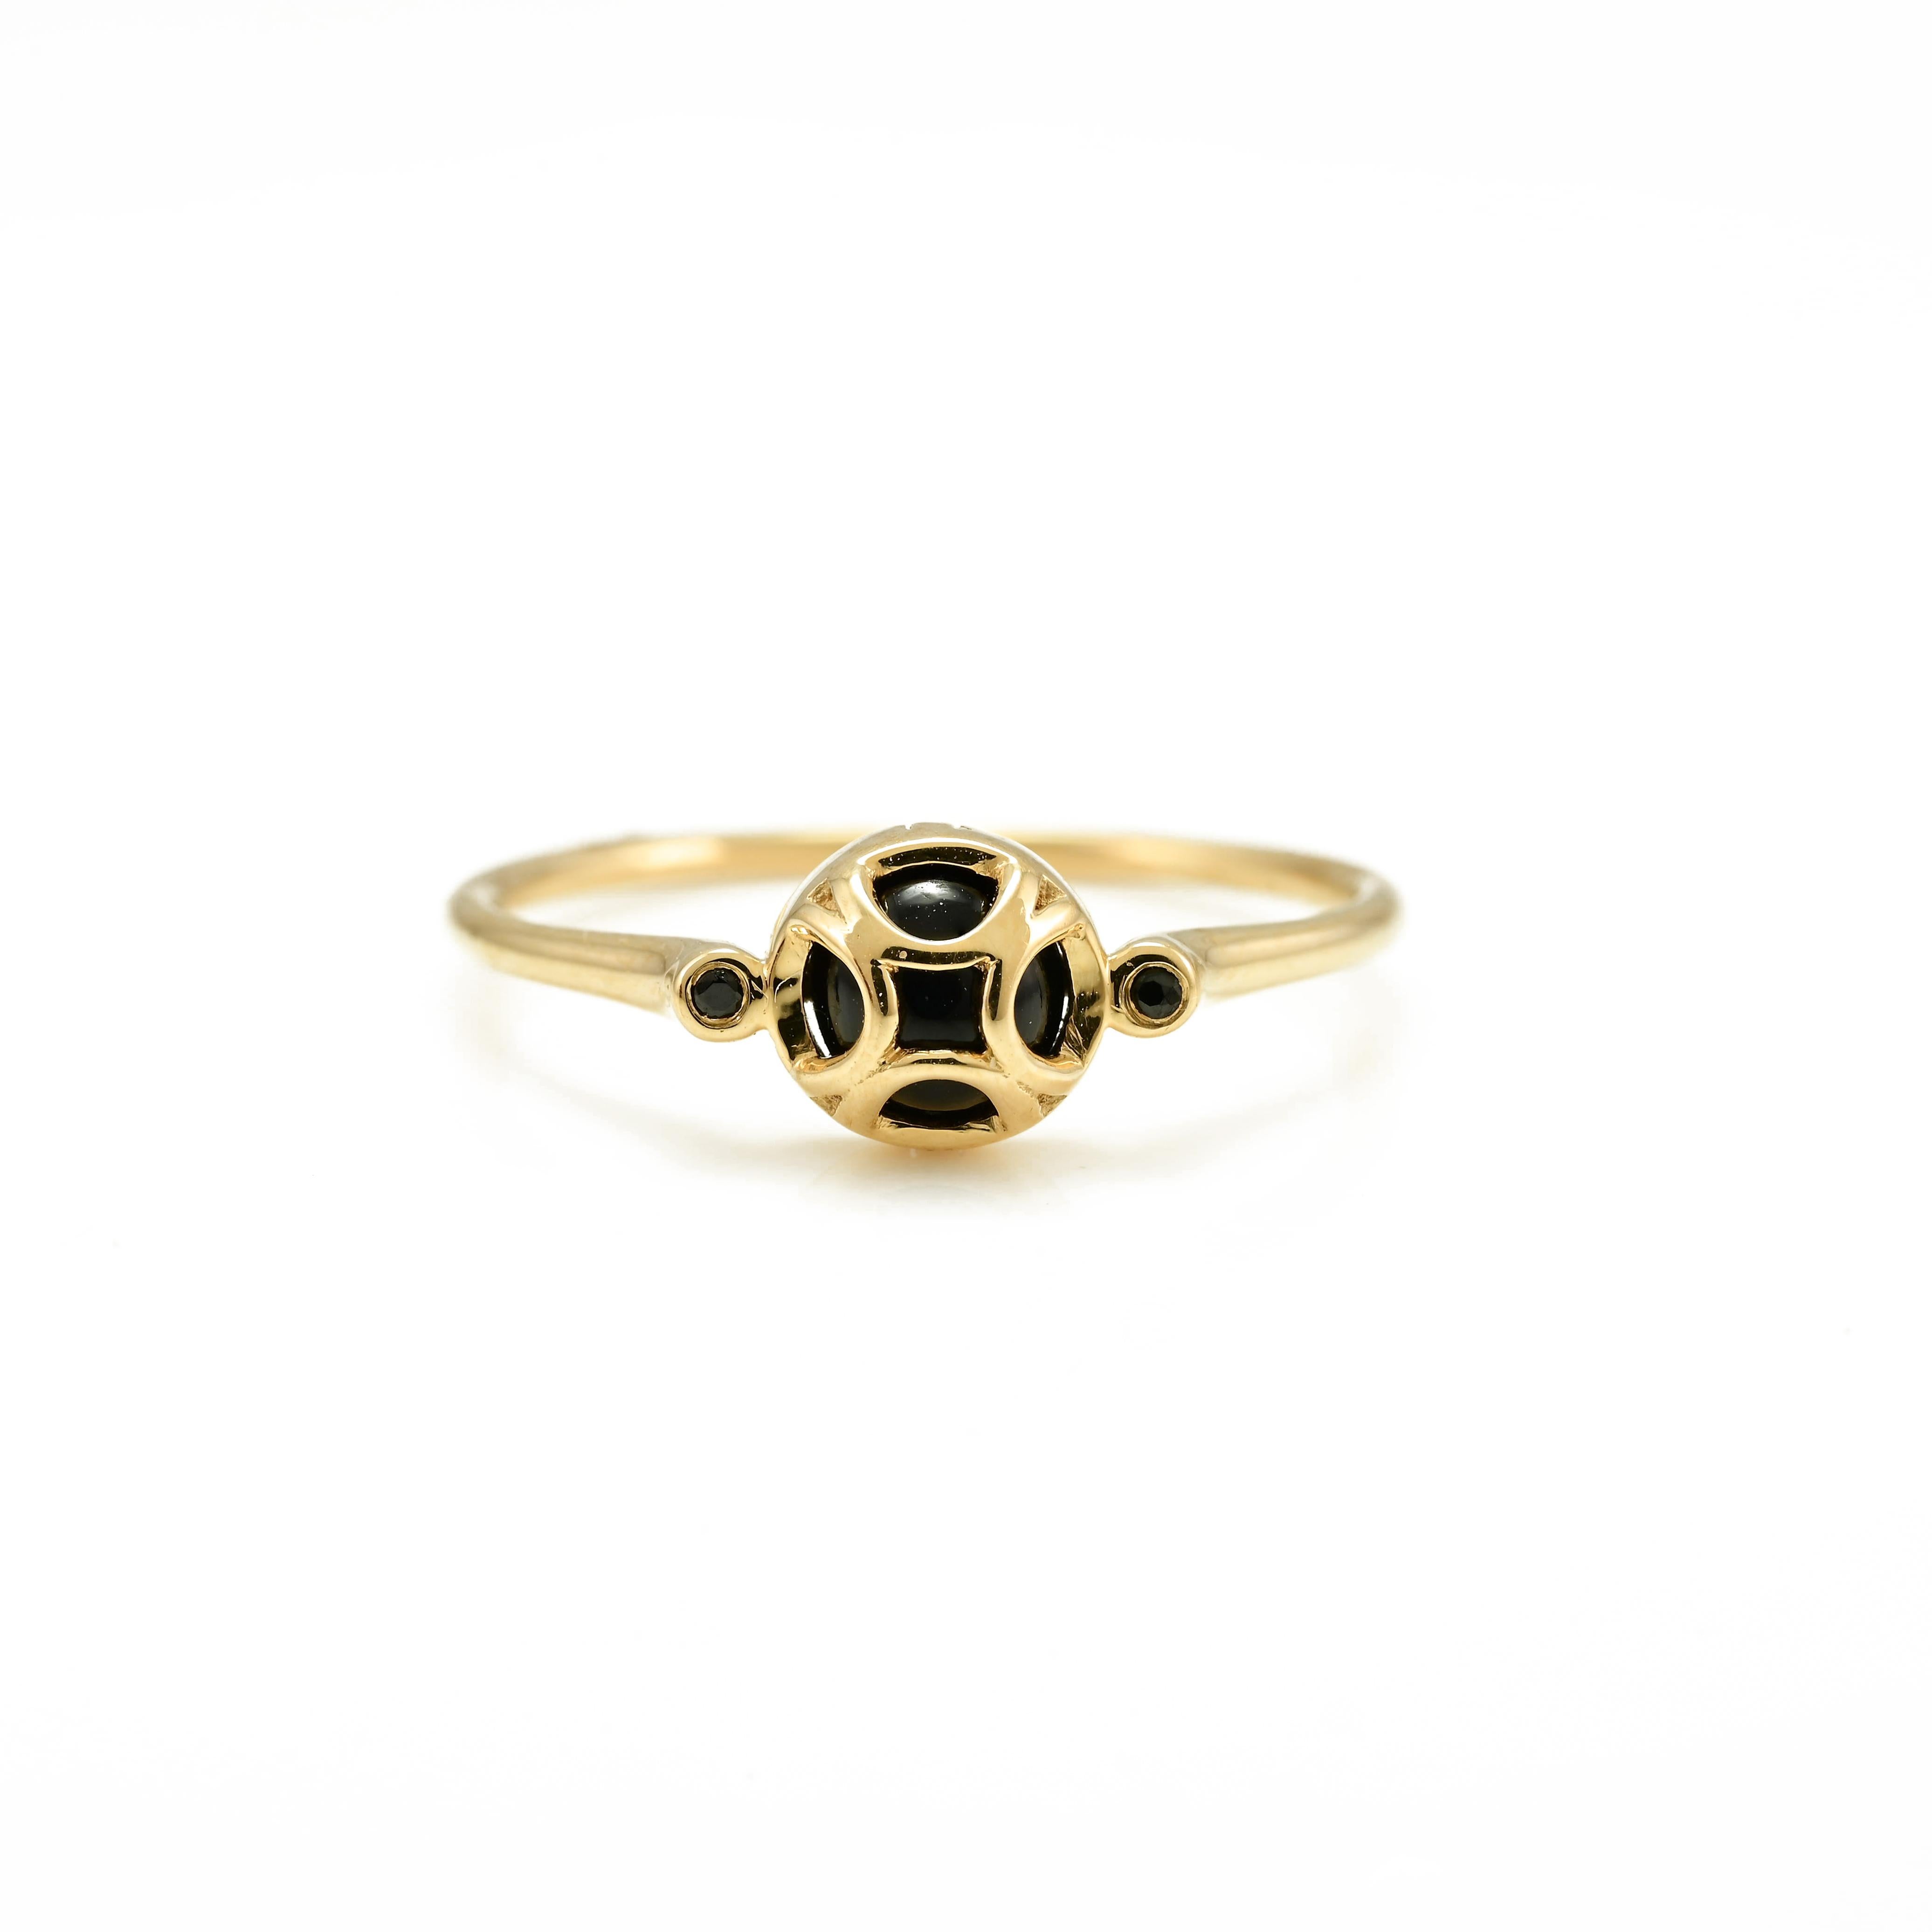 For Sale:  Unique 18k Solid Yellow Gold Dainty Black Onyx Gemstone Everyday Ring For Her 4